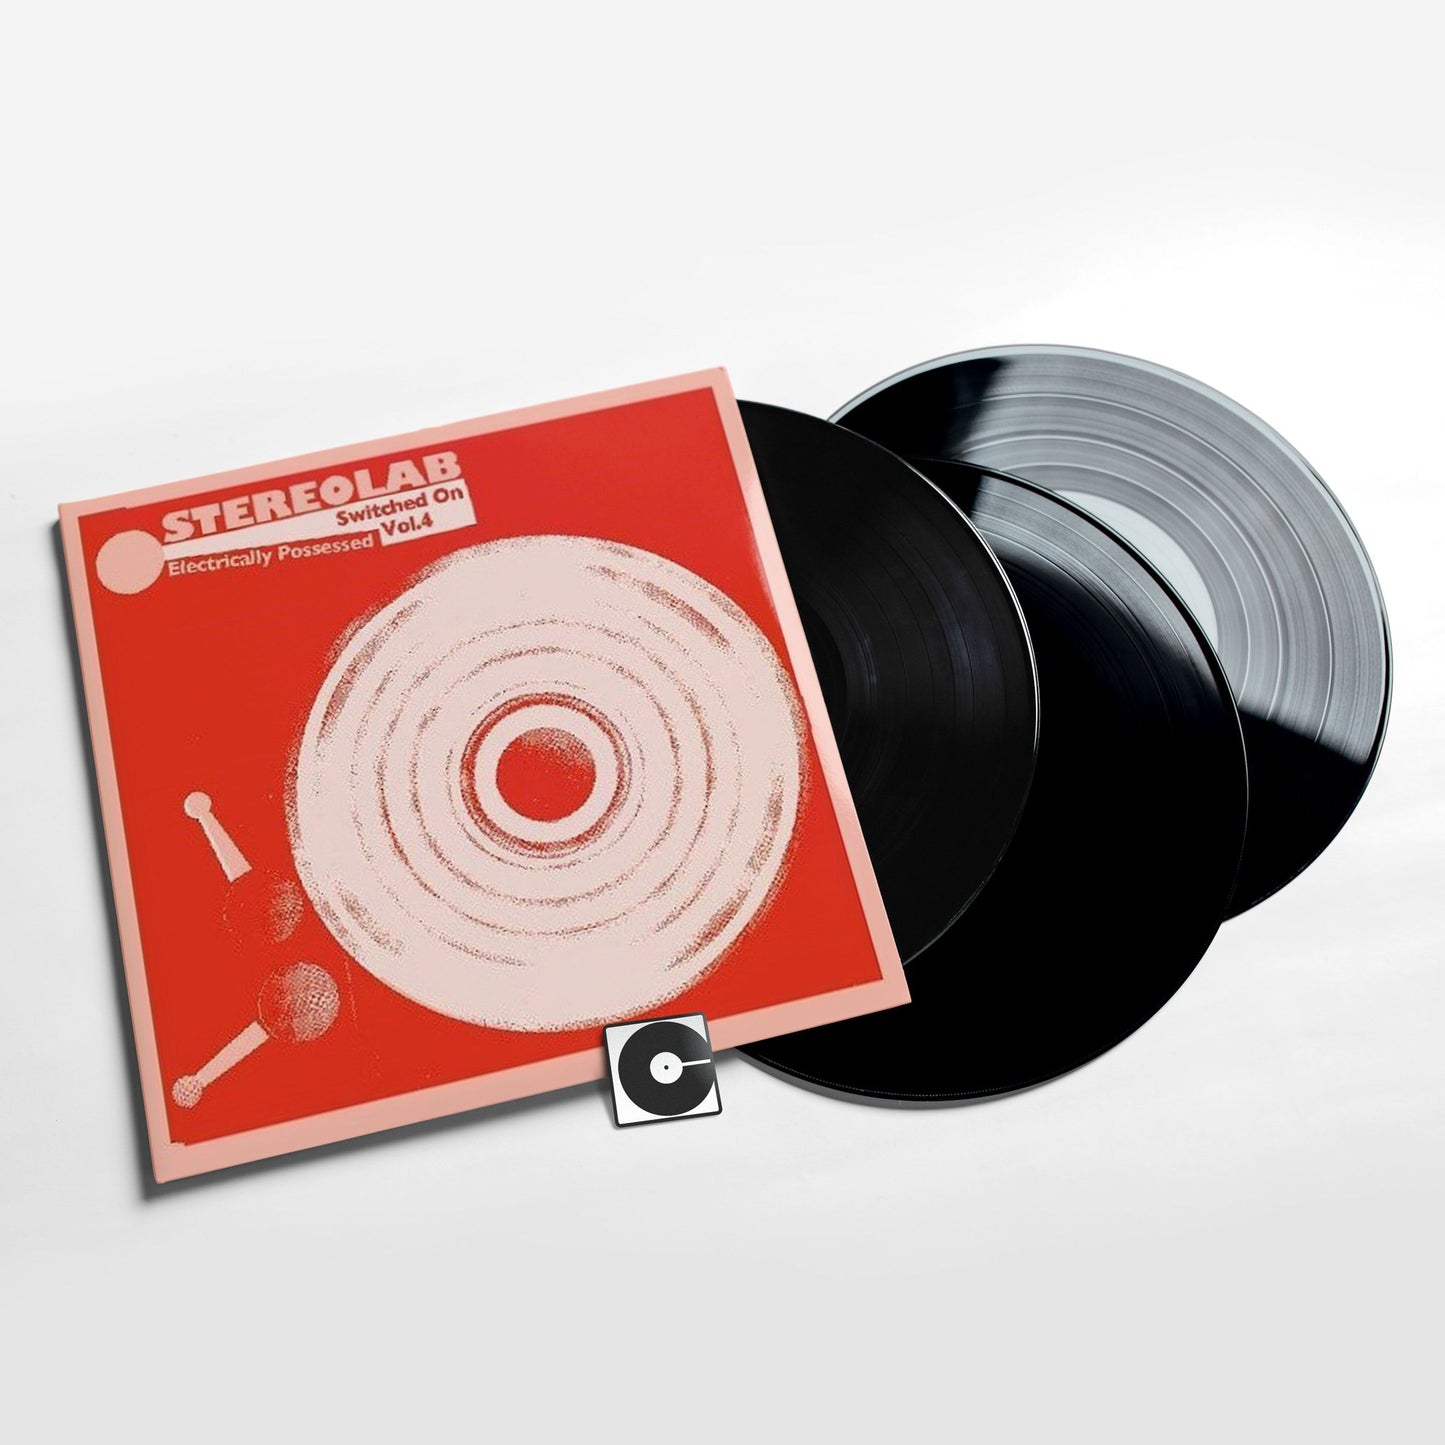 Stereolab - "Electrically Posscessed (Switched On Vol. 4)"